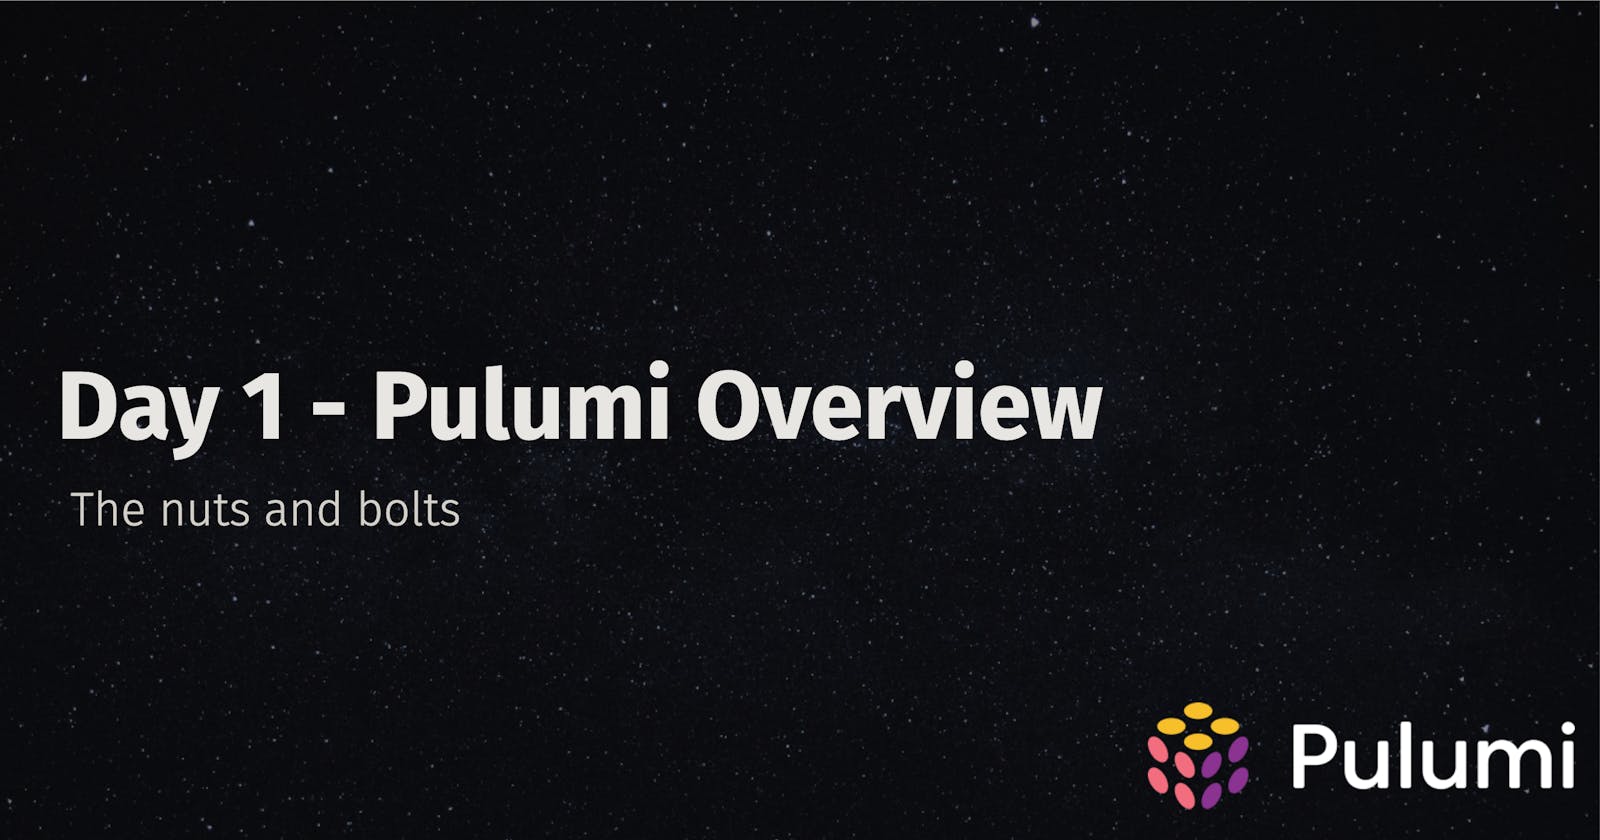 Your first day with Pulumi.